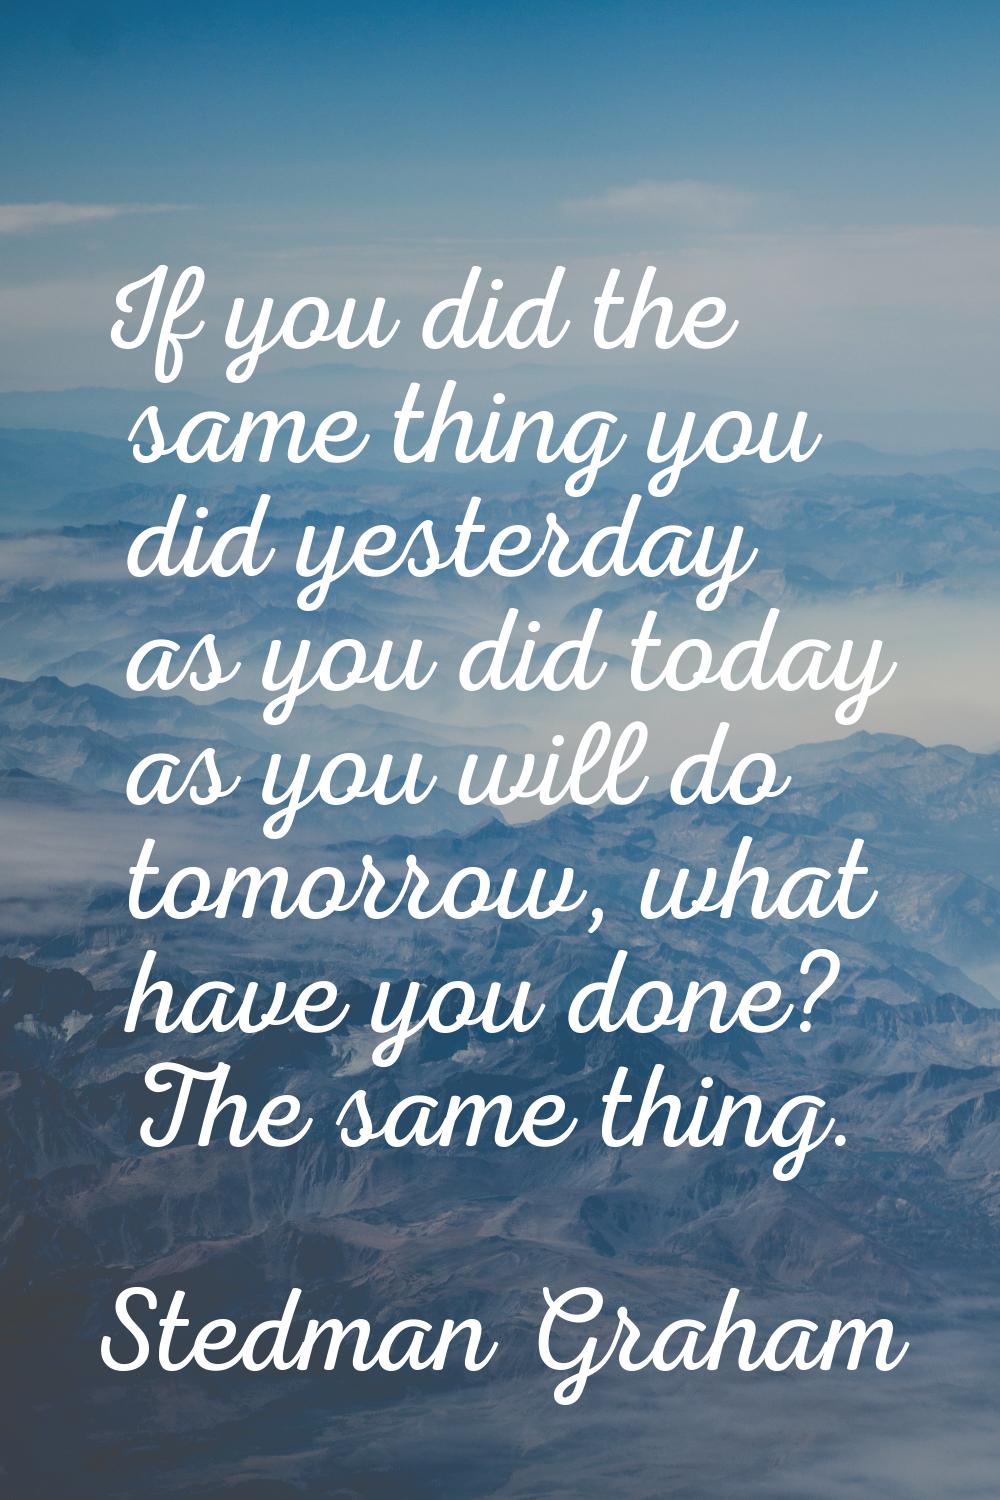 If you did the same thing you did yesterday as you did today as you will do tomorrow, what have you